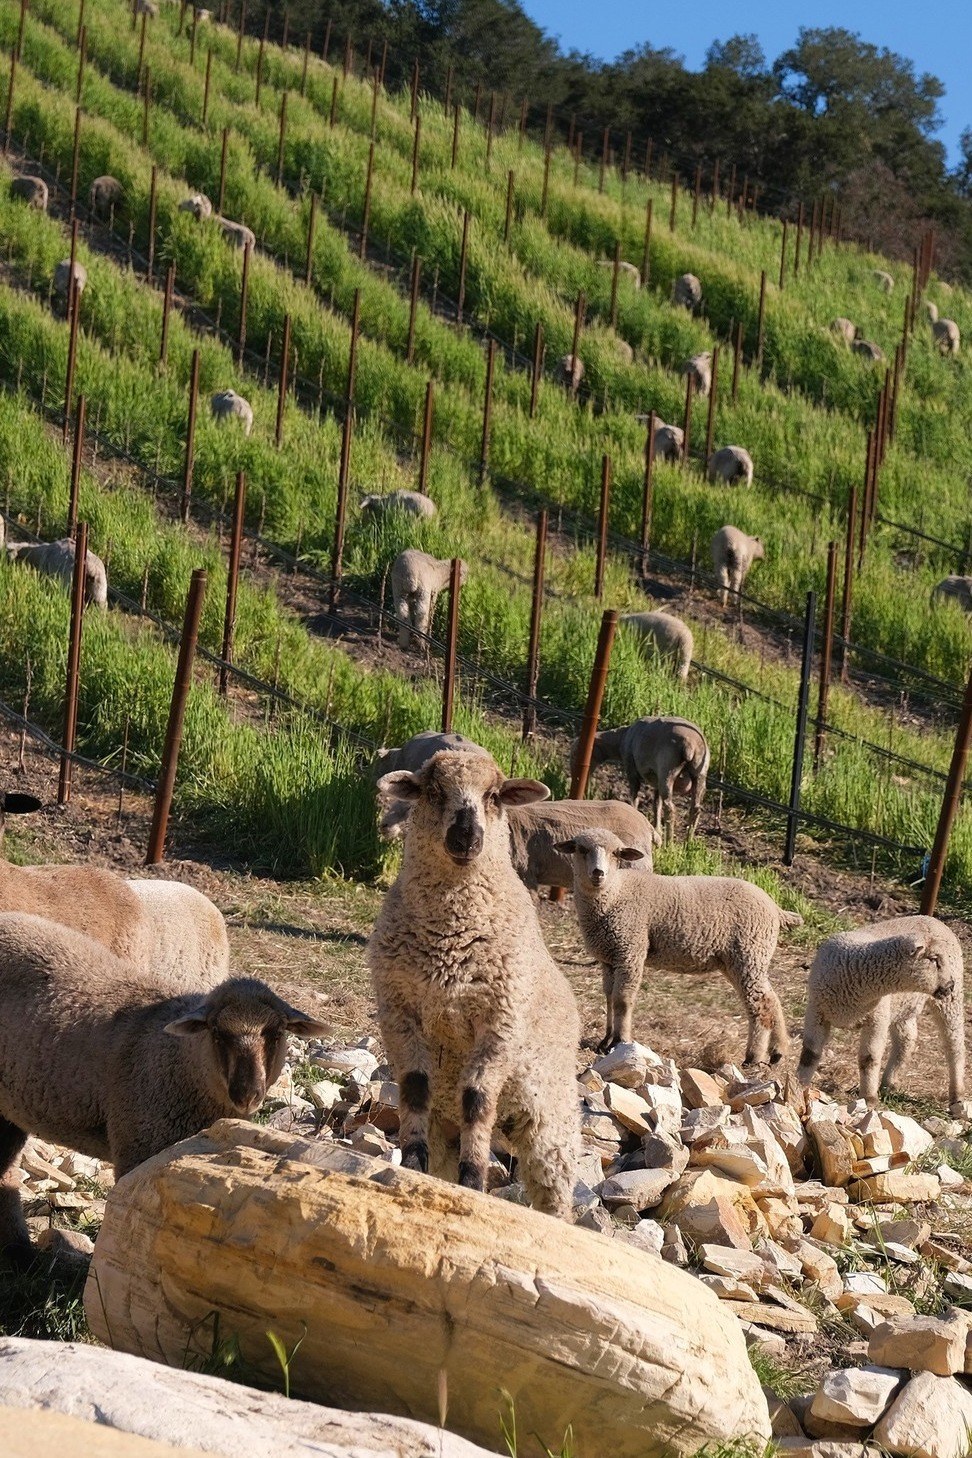 A sheep stands on a rock in the foreground, with green vineyards hillsides and more sheep dotting the hill behind it.